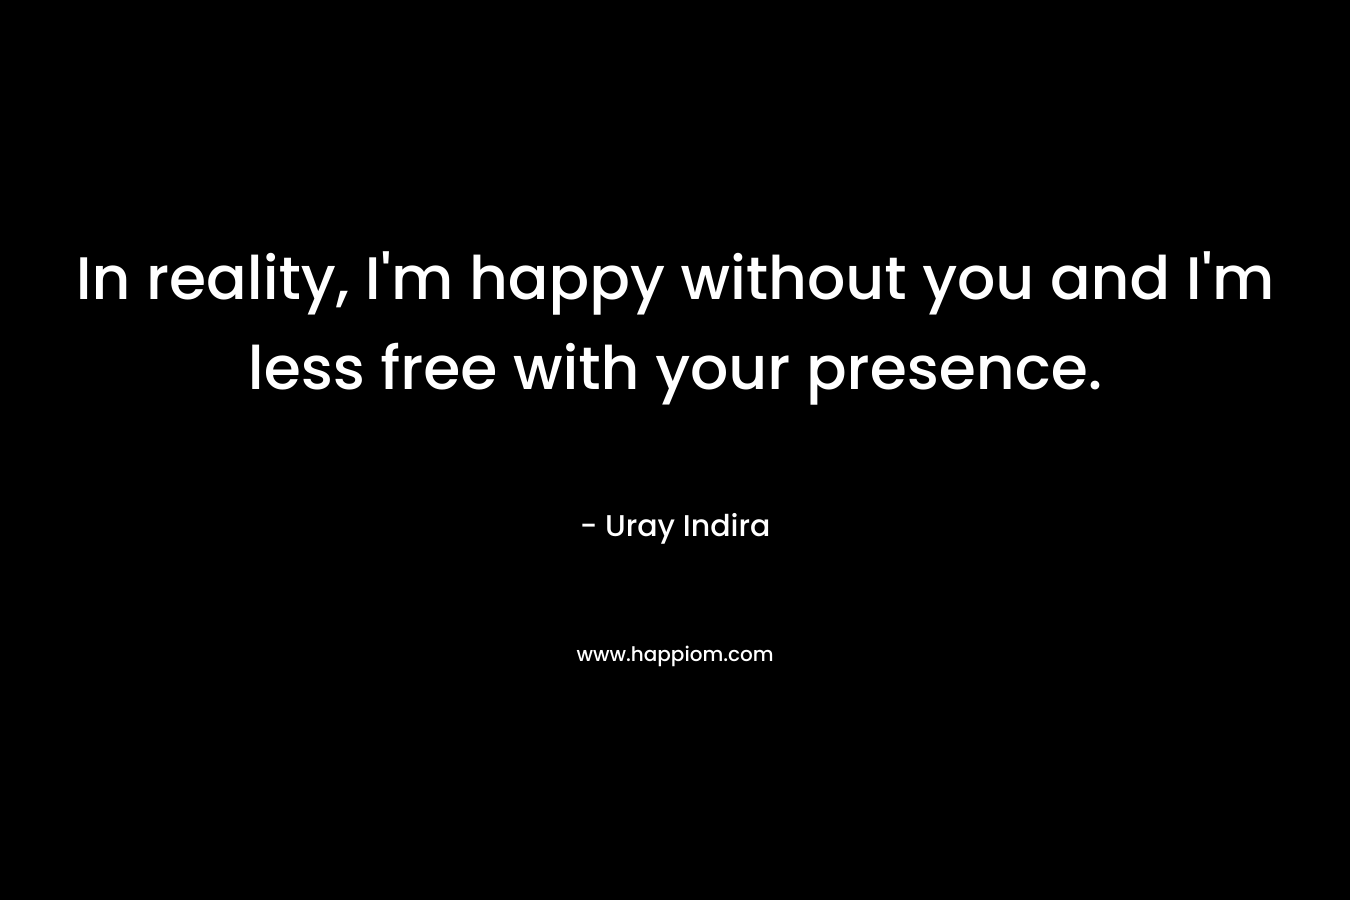 In reality, I'm happy without you and I'm less free with your presence.